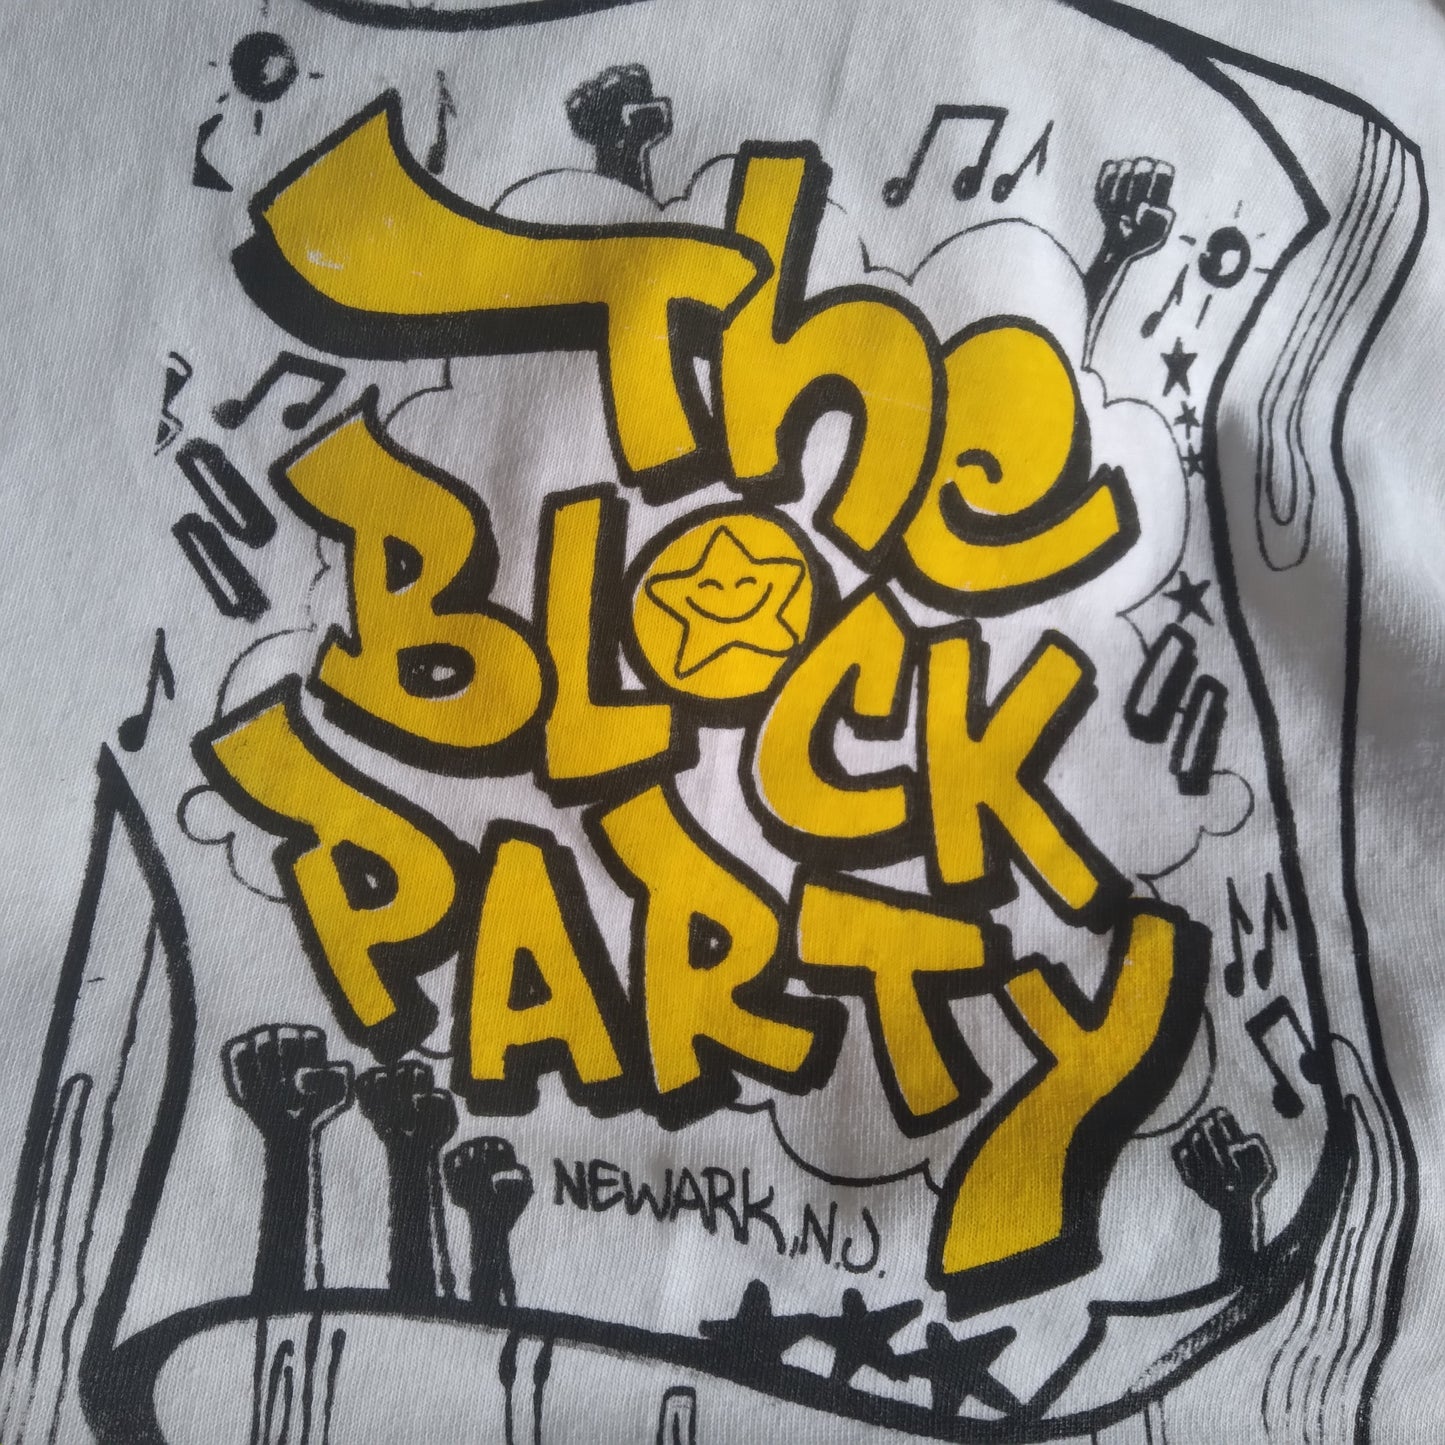 "The Block Party" Tee